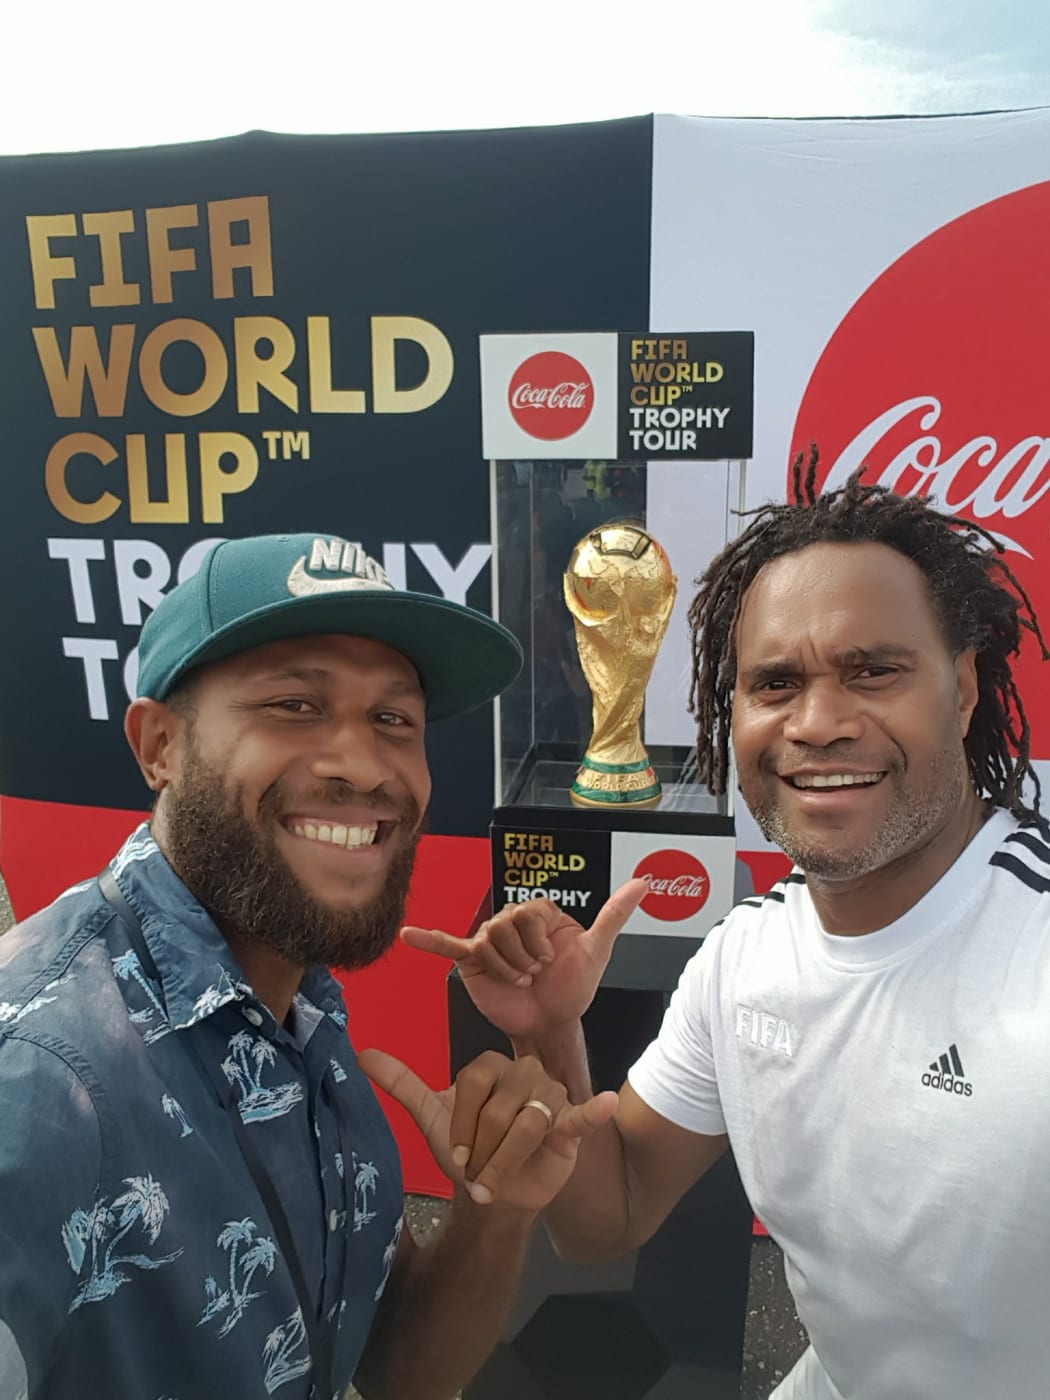 Solomon Islands National Football captain Henry Fa'arodo poses infront of the the FIFA World CUp Trophy with France's Christian Karembeu in Honiara, Solomon Islands. 01 February 2018